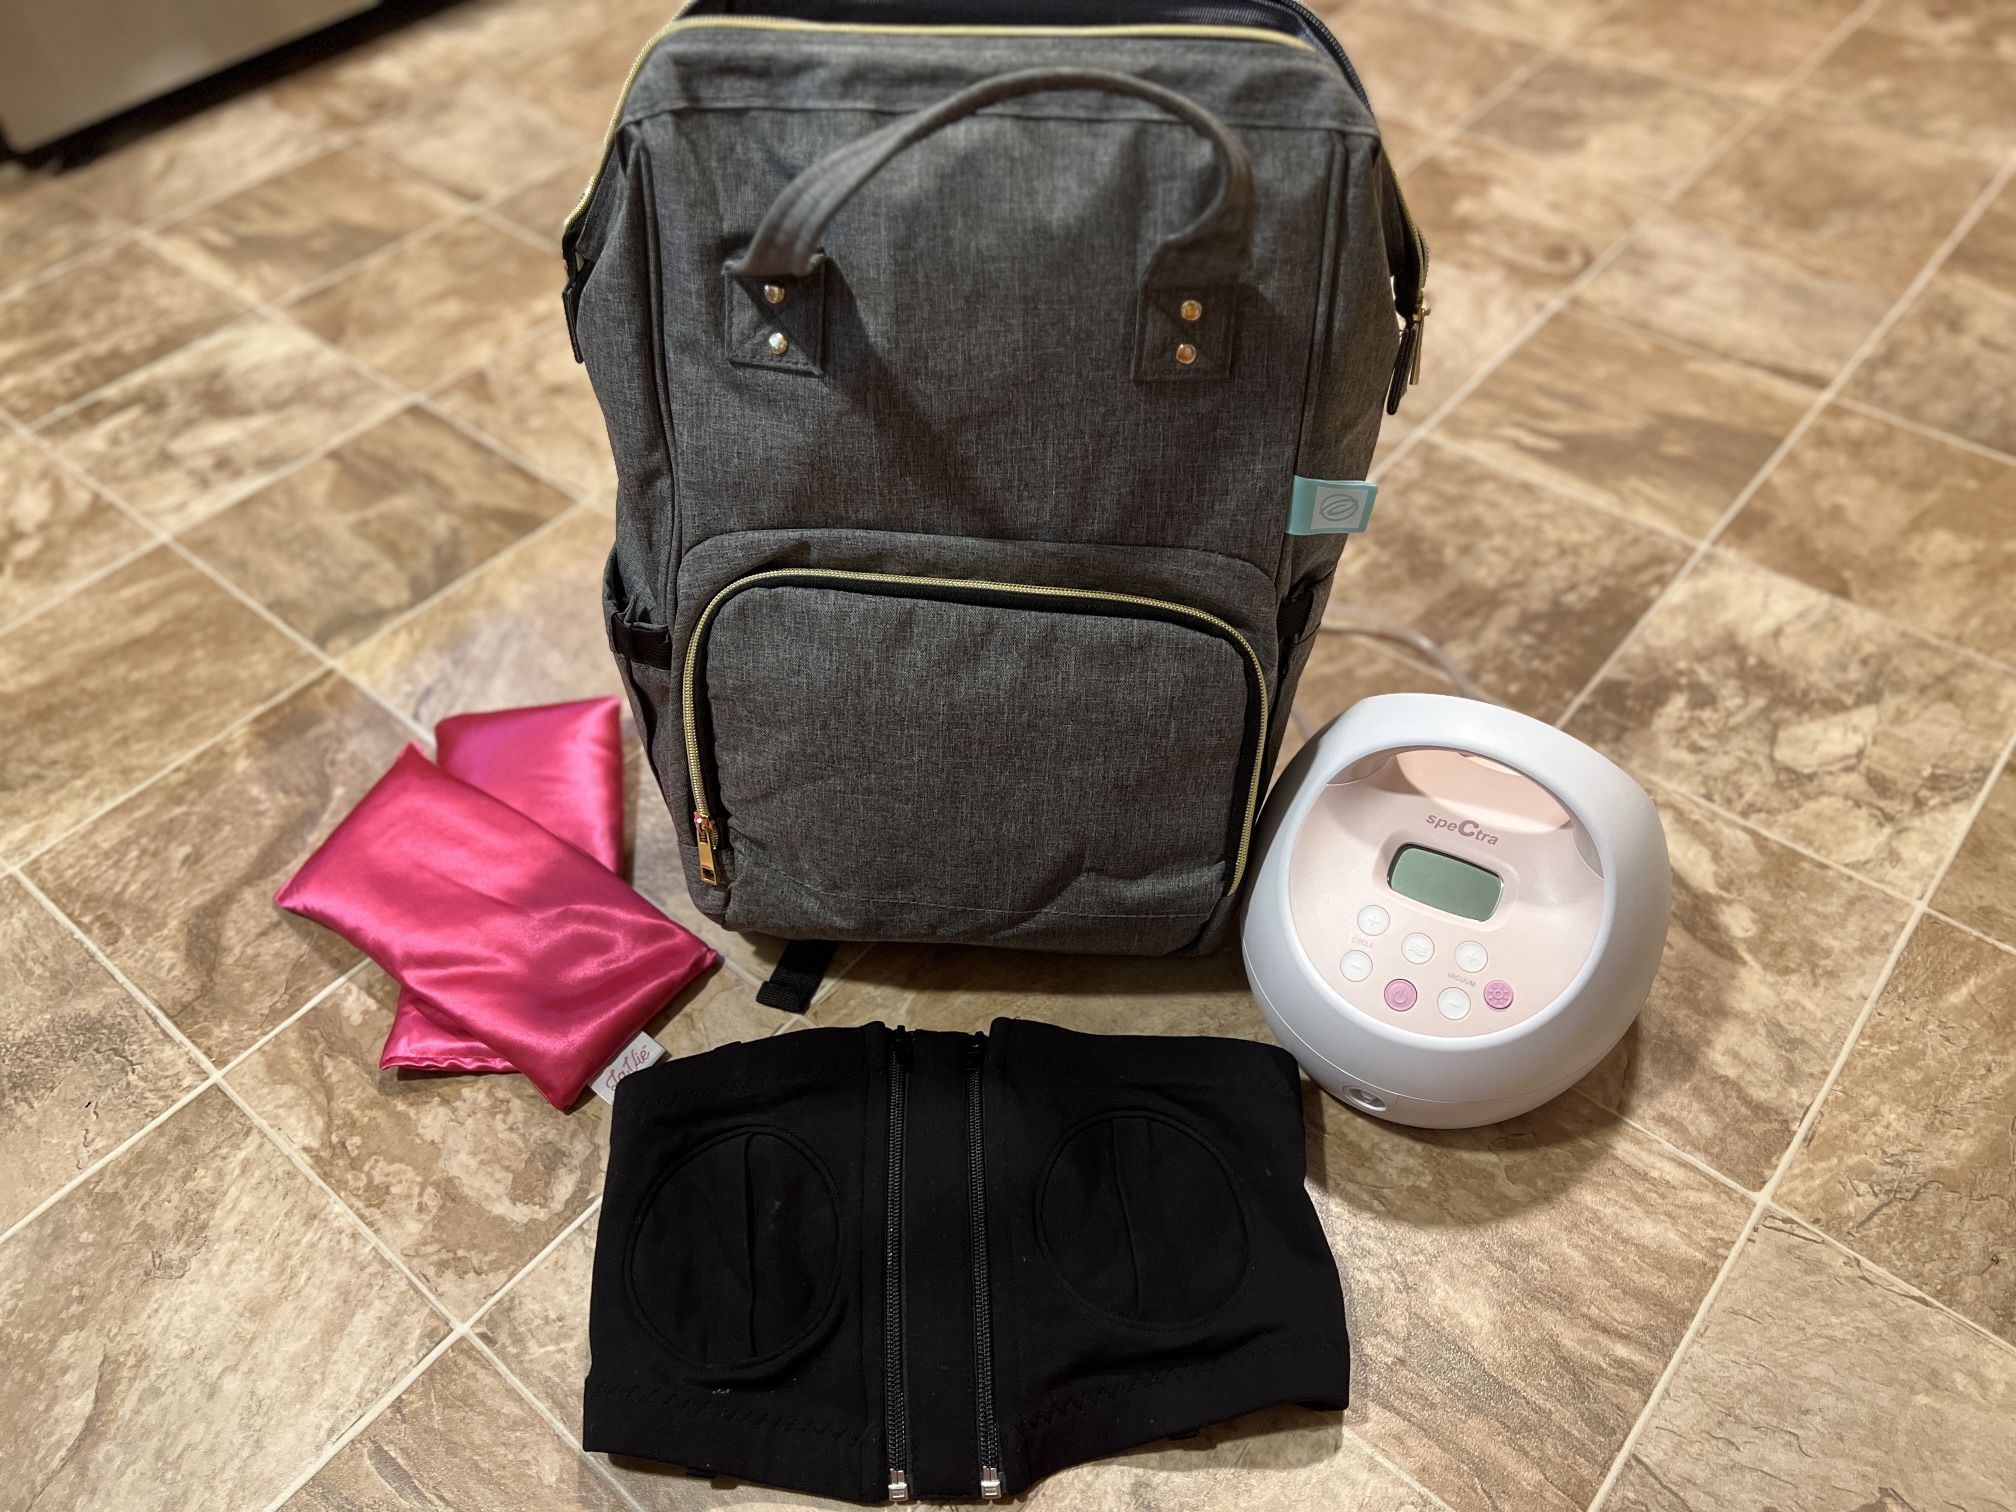 Spectra Pump, Backpack, Pumping Bra, and  Lavender Scented Warming Packs